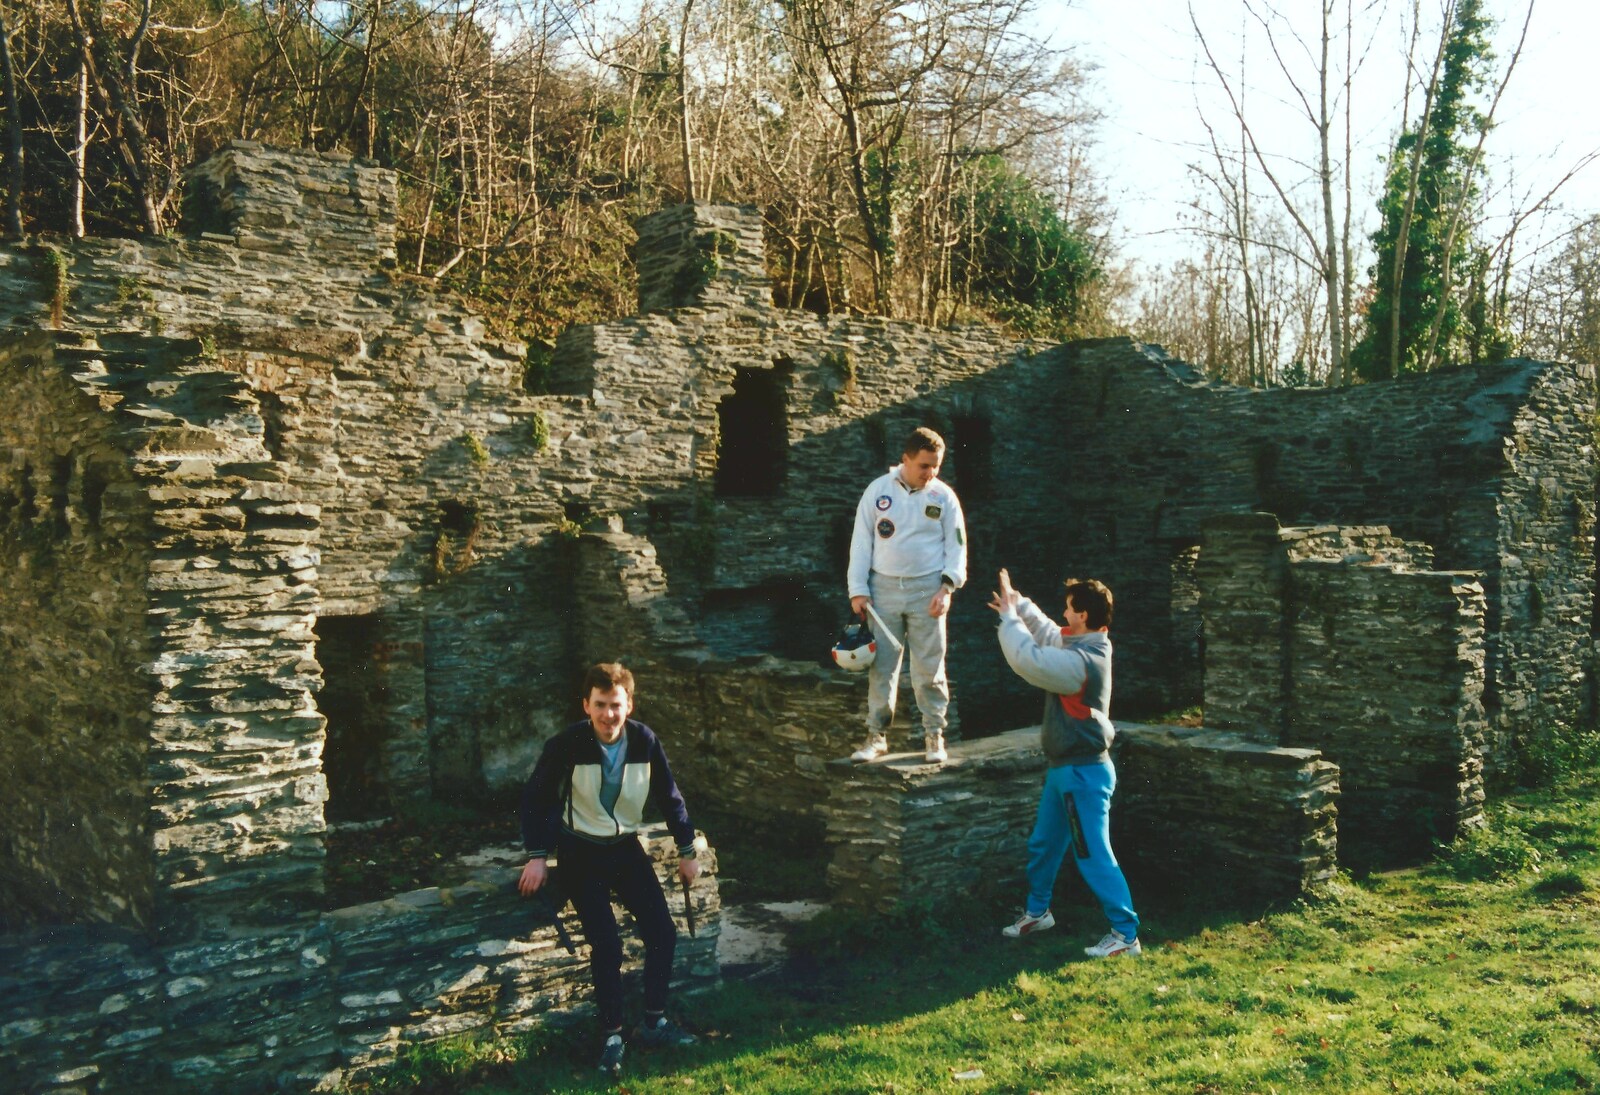 The lads mess around in derelict houses from Uni: A Ride on the Plym Valley Cycle Path, Plymstock, Devon - 26th February 1989